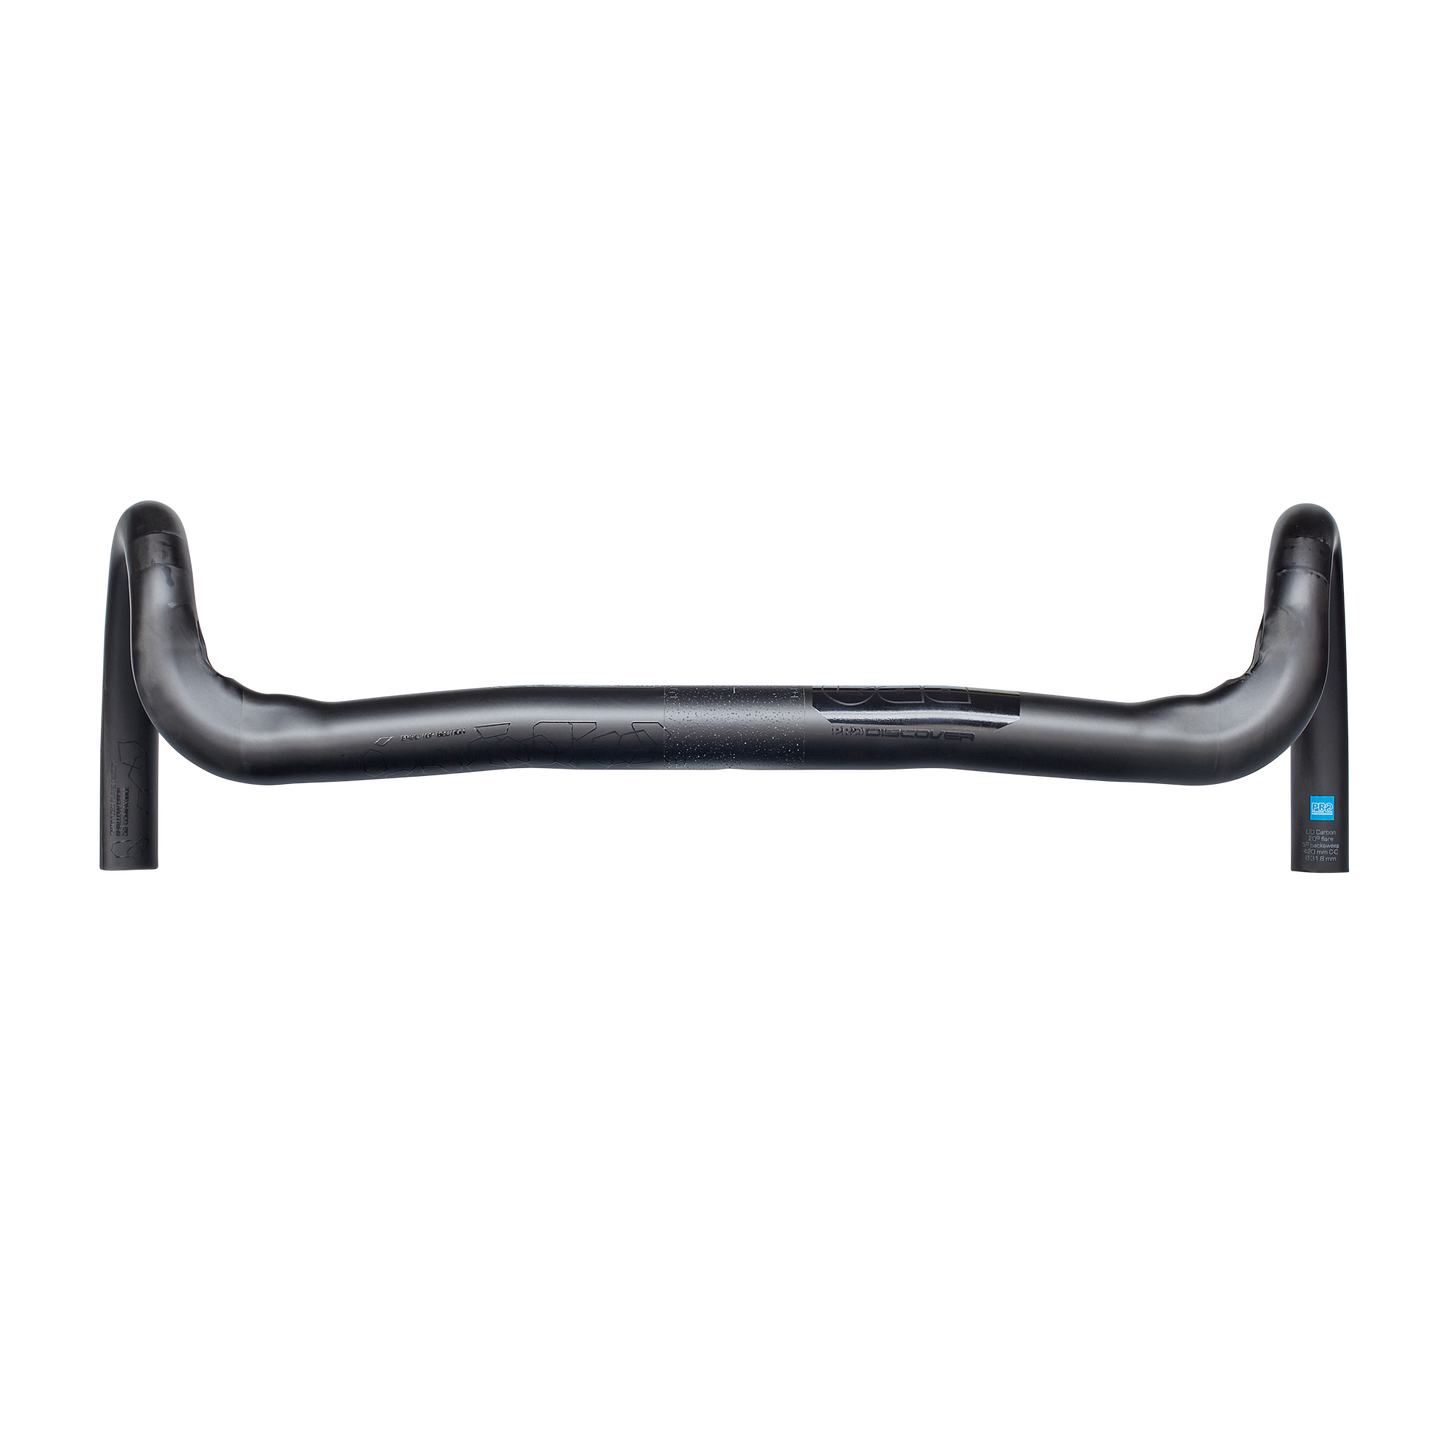 PRO DISCOVER 碳纖維車頭 20度低角度-40CM/31.8MM / PRO DISCOVER CARBON HANDLEBAR-20dr Flare/40CM/31.8MM